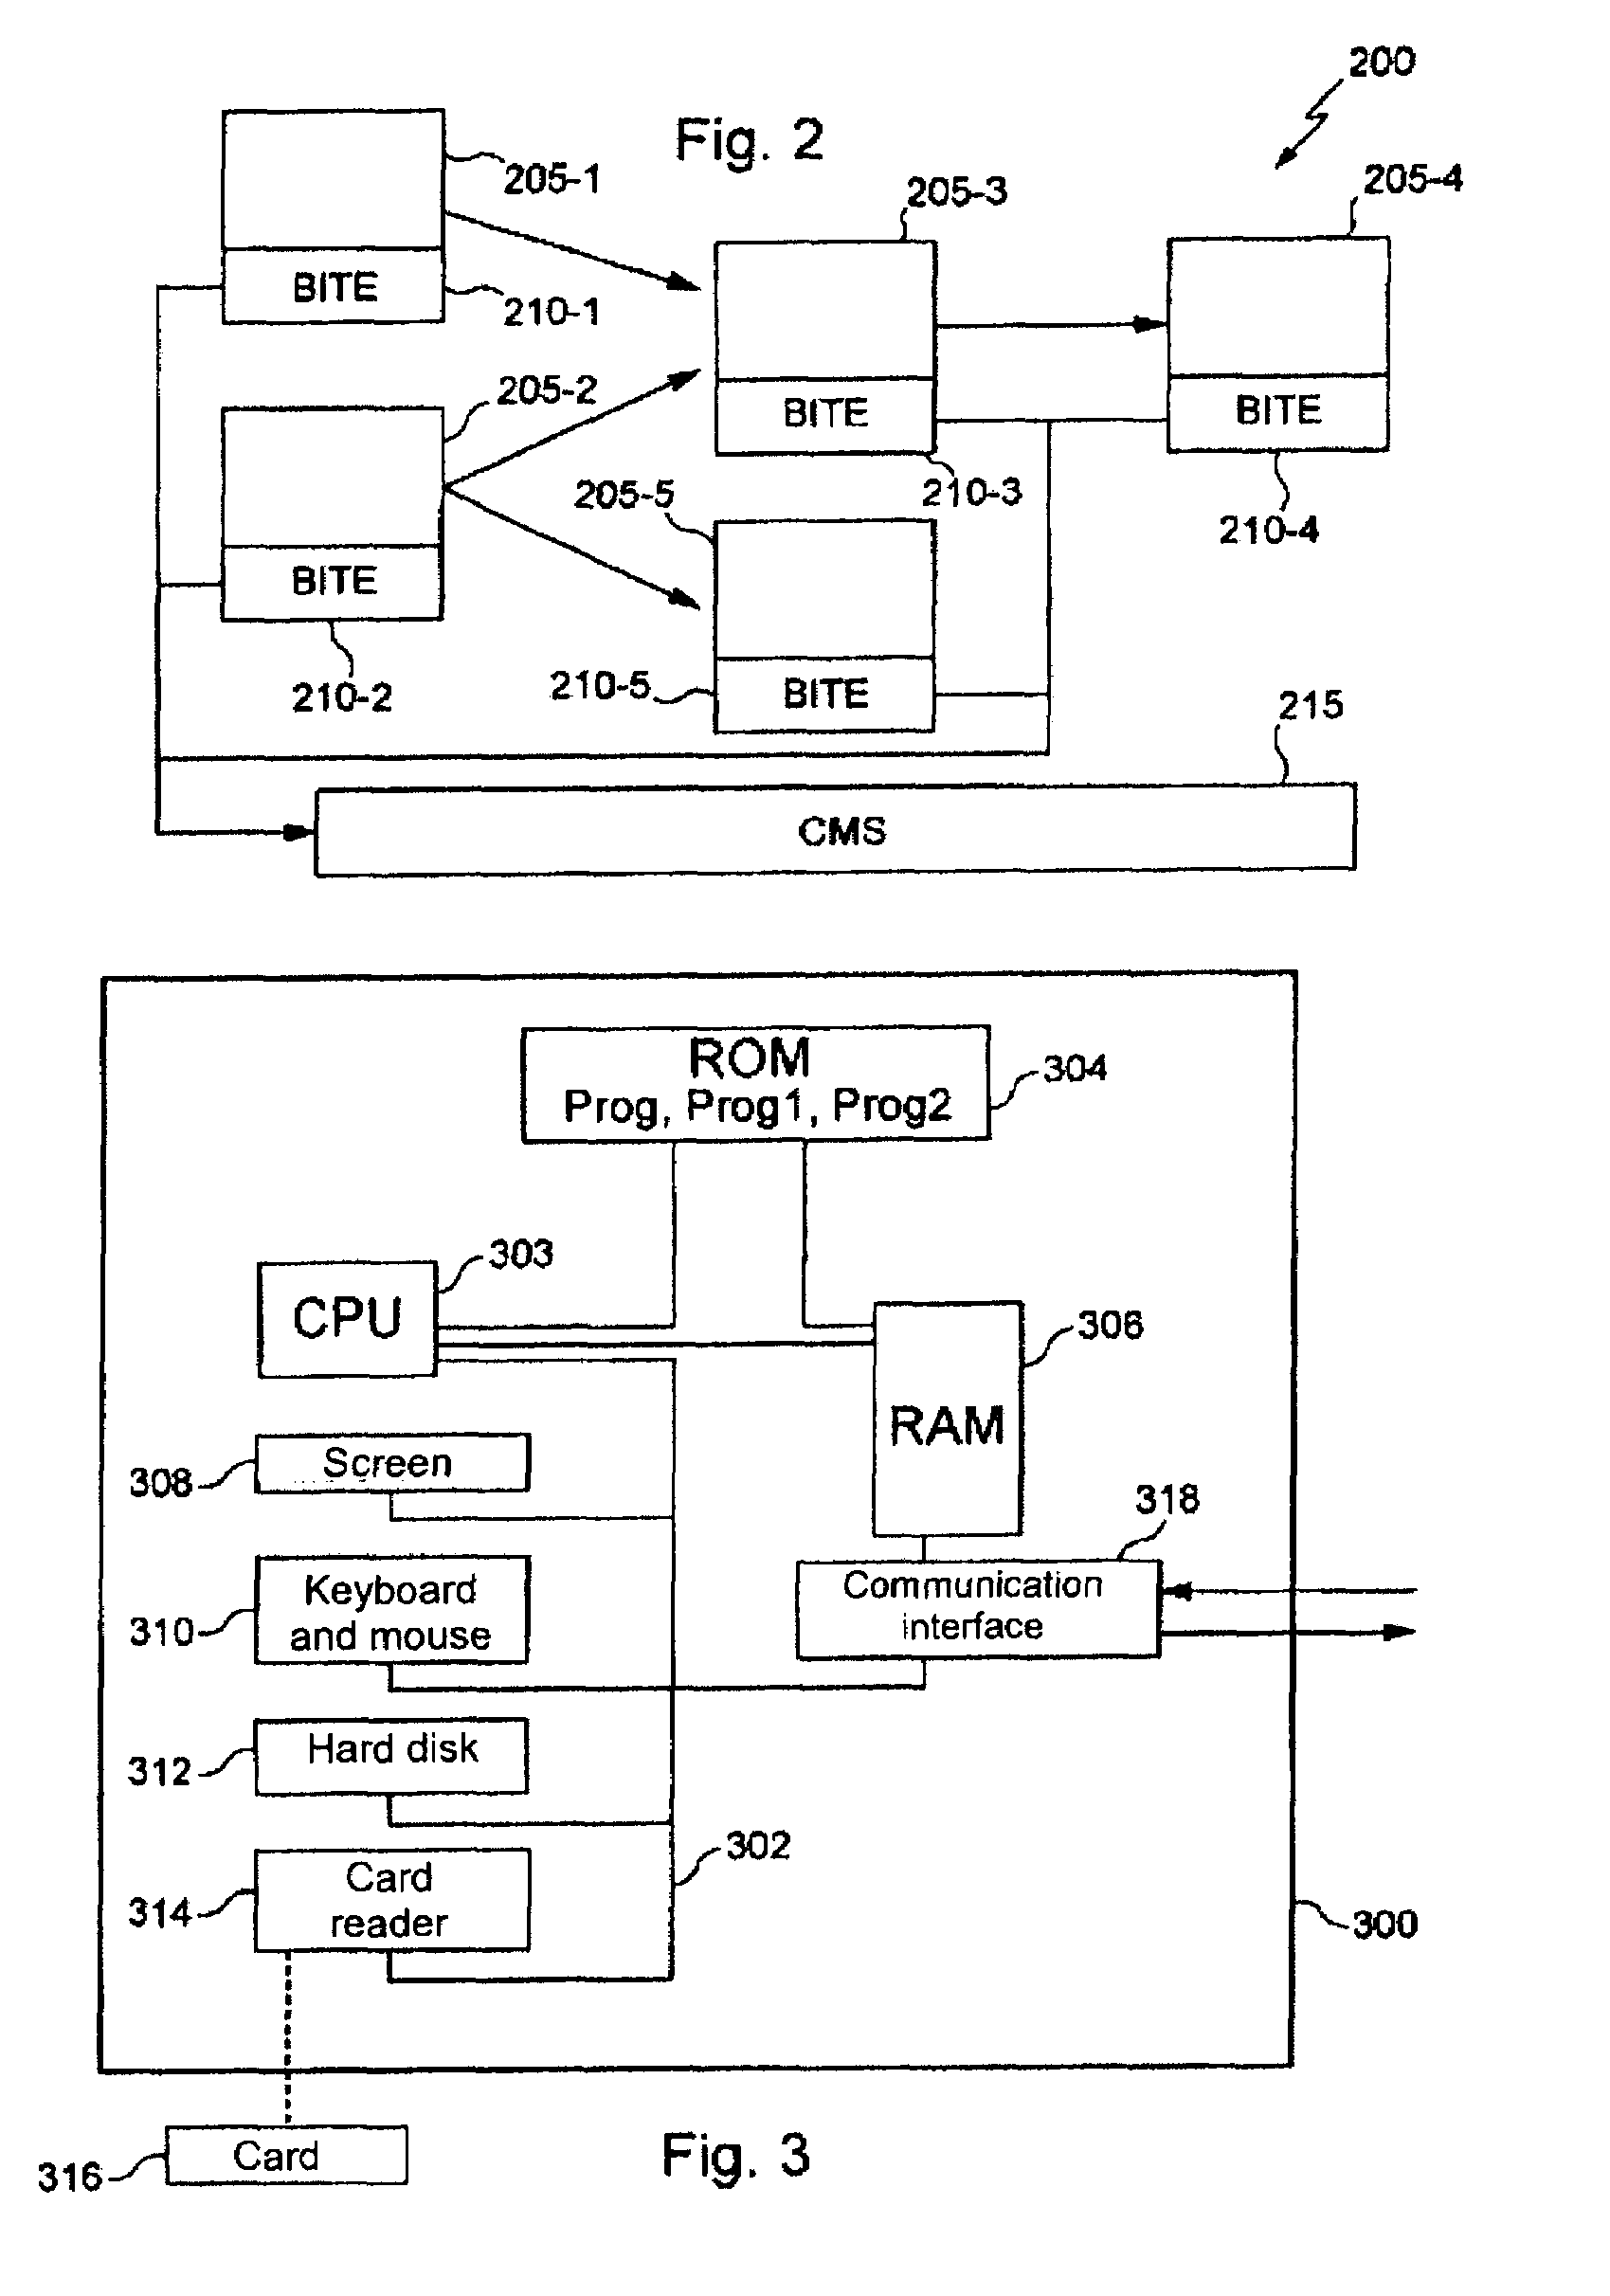 Process and device for diagnostic and maintenance operations of aircraft